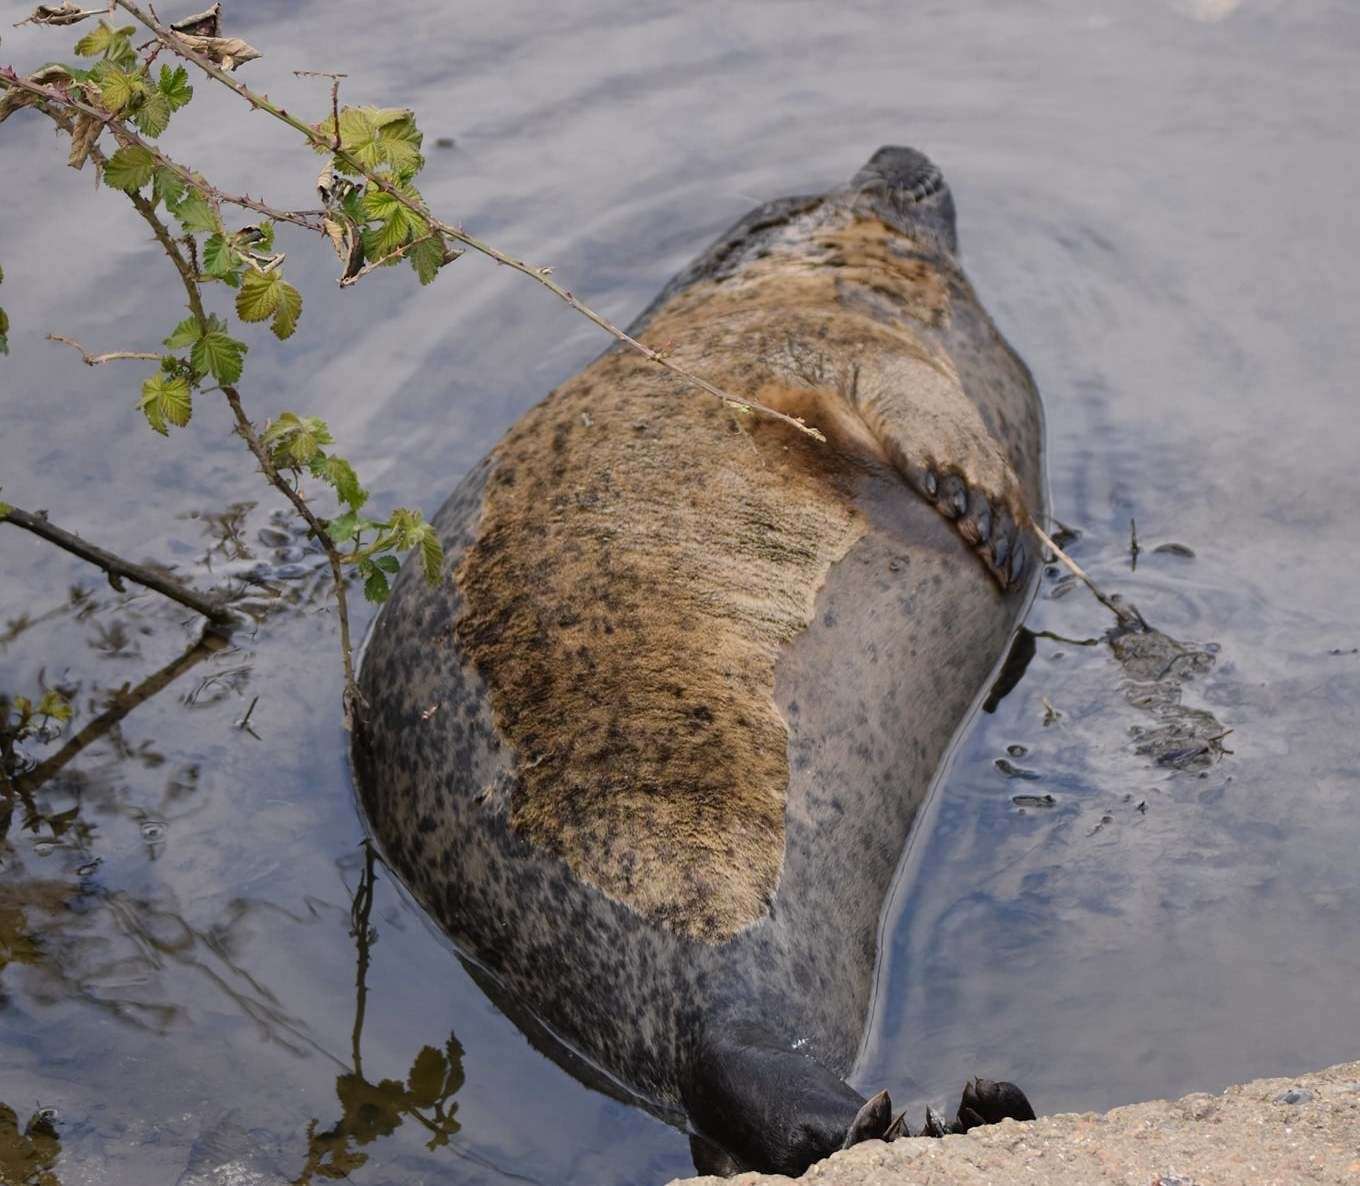 The seal was first spotted in the River Medway a fortnight ago. Picture: Robert Greenham